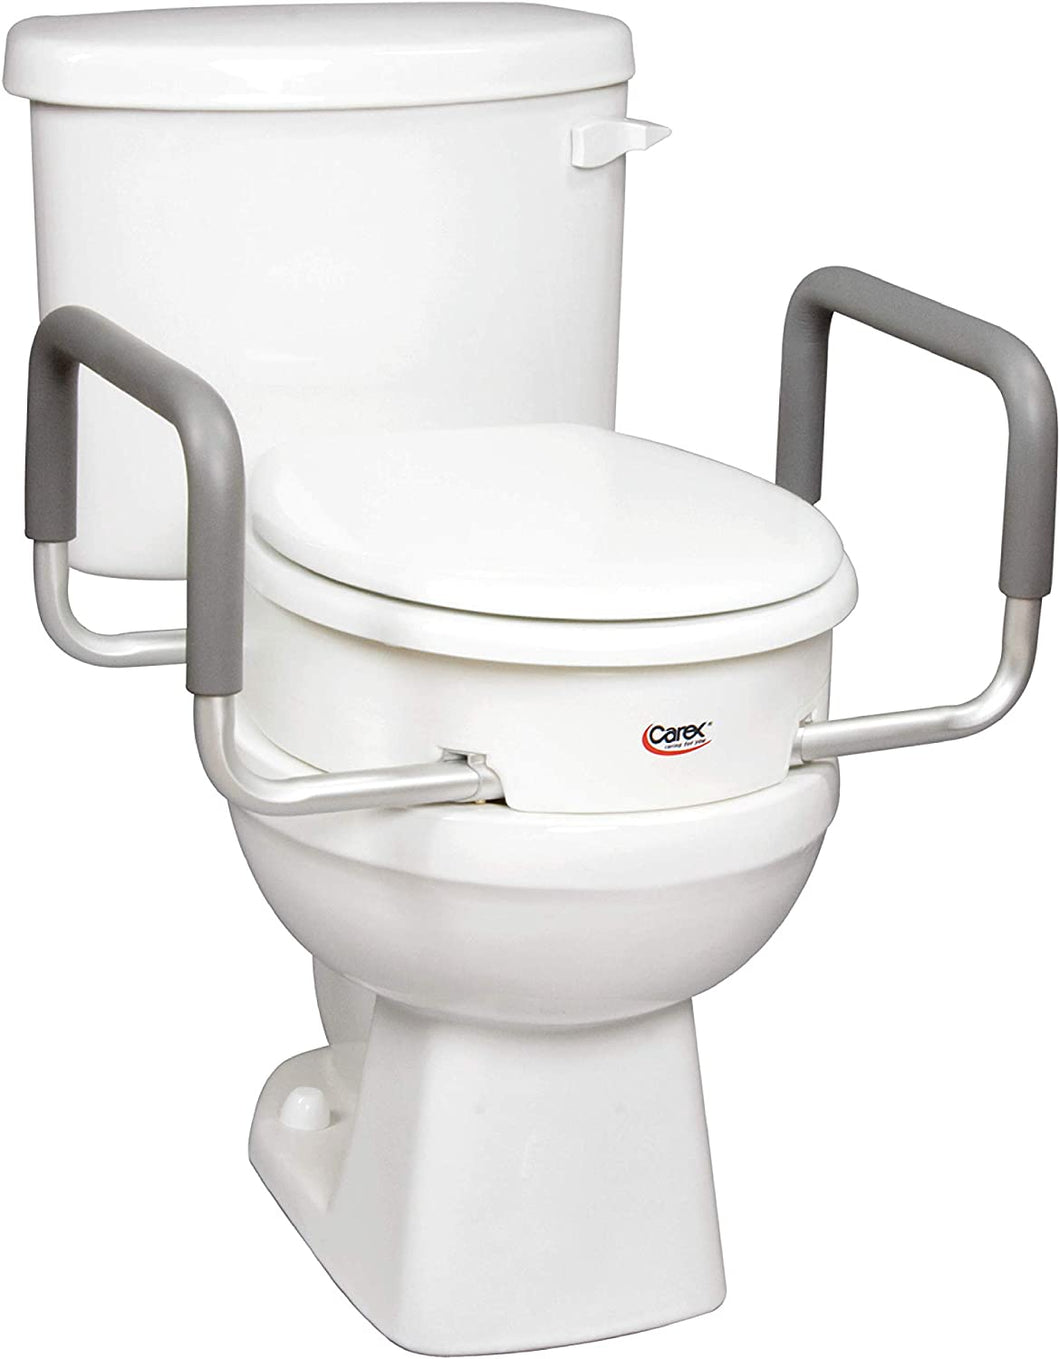 SilverCrate+™ Elevated Toilet Riser with Removable Padded Handles